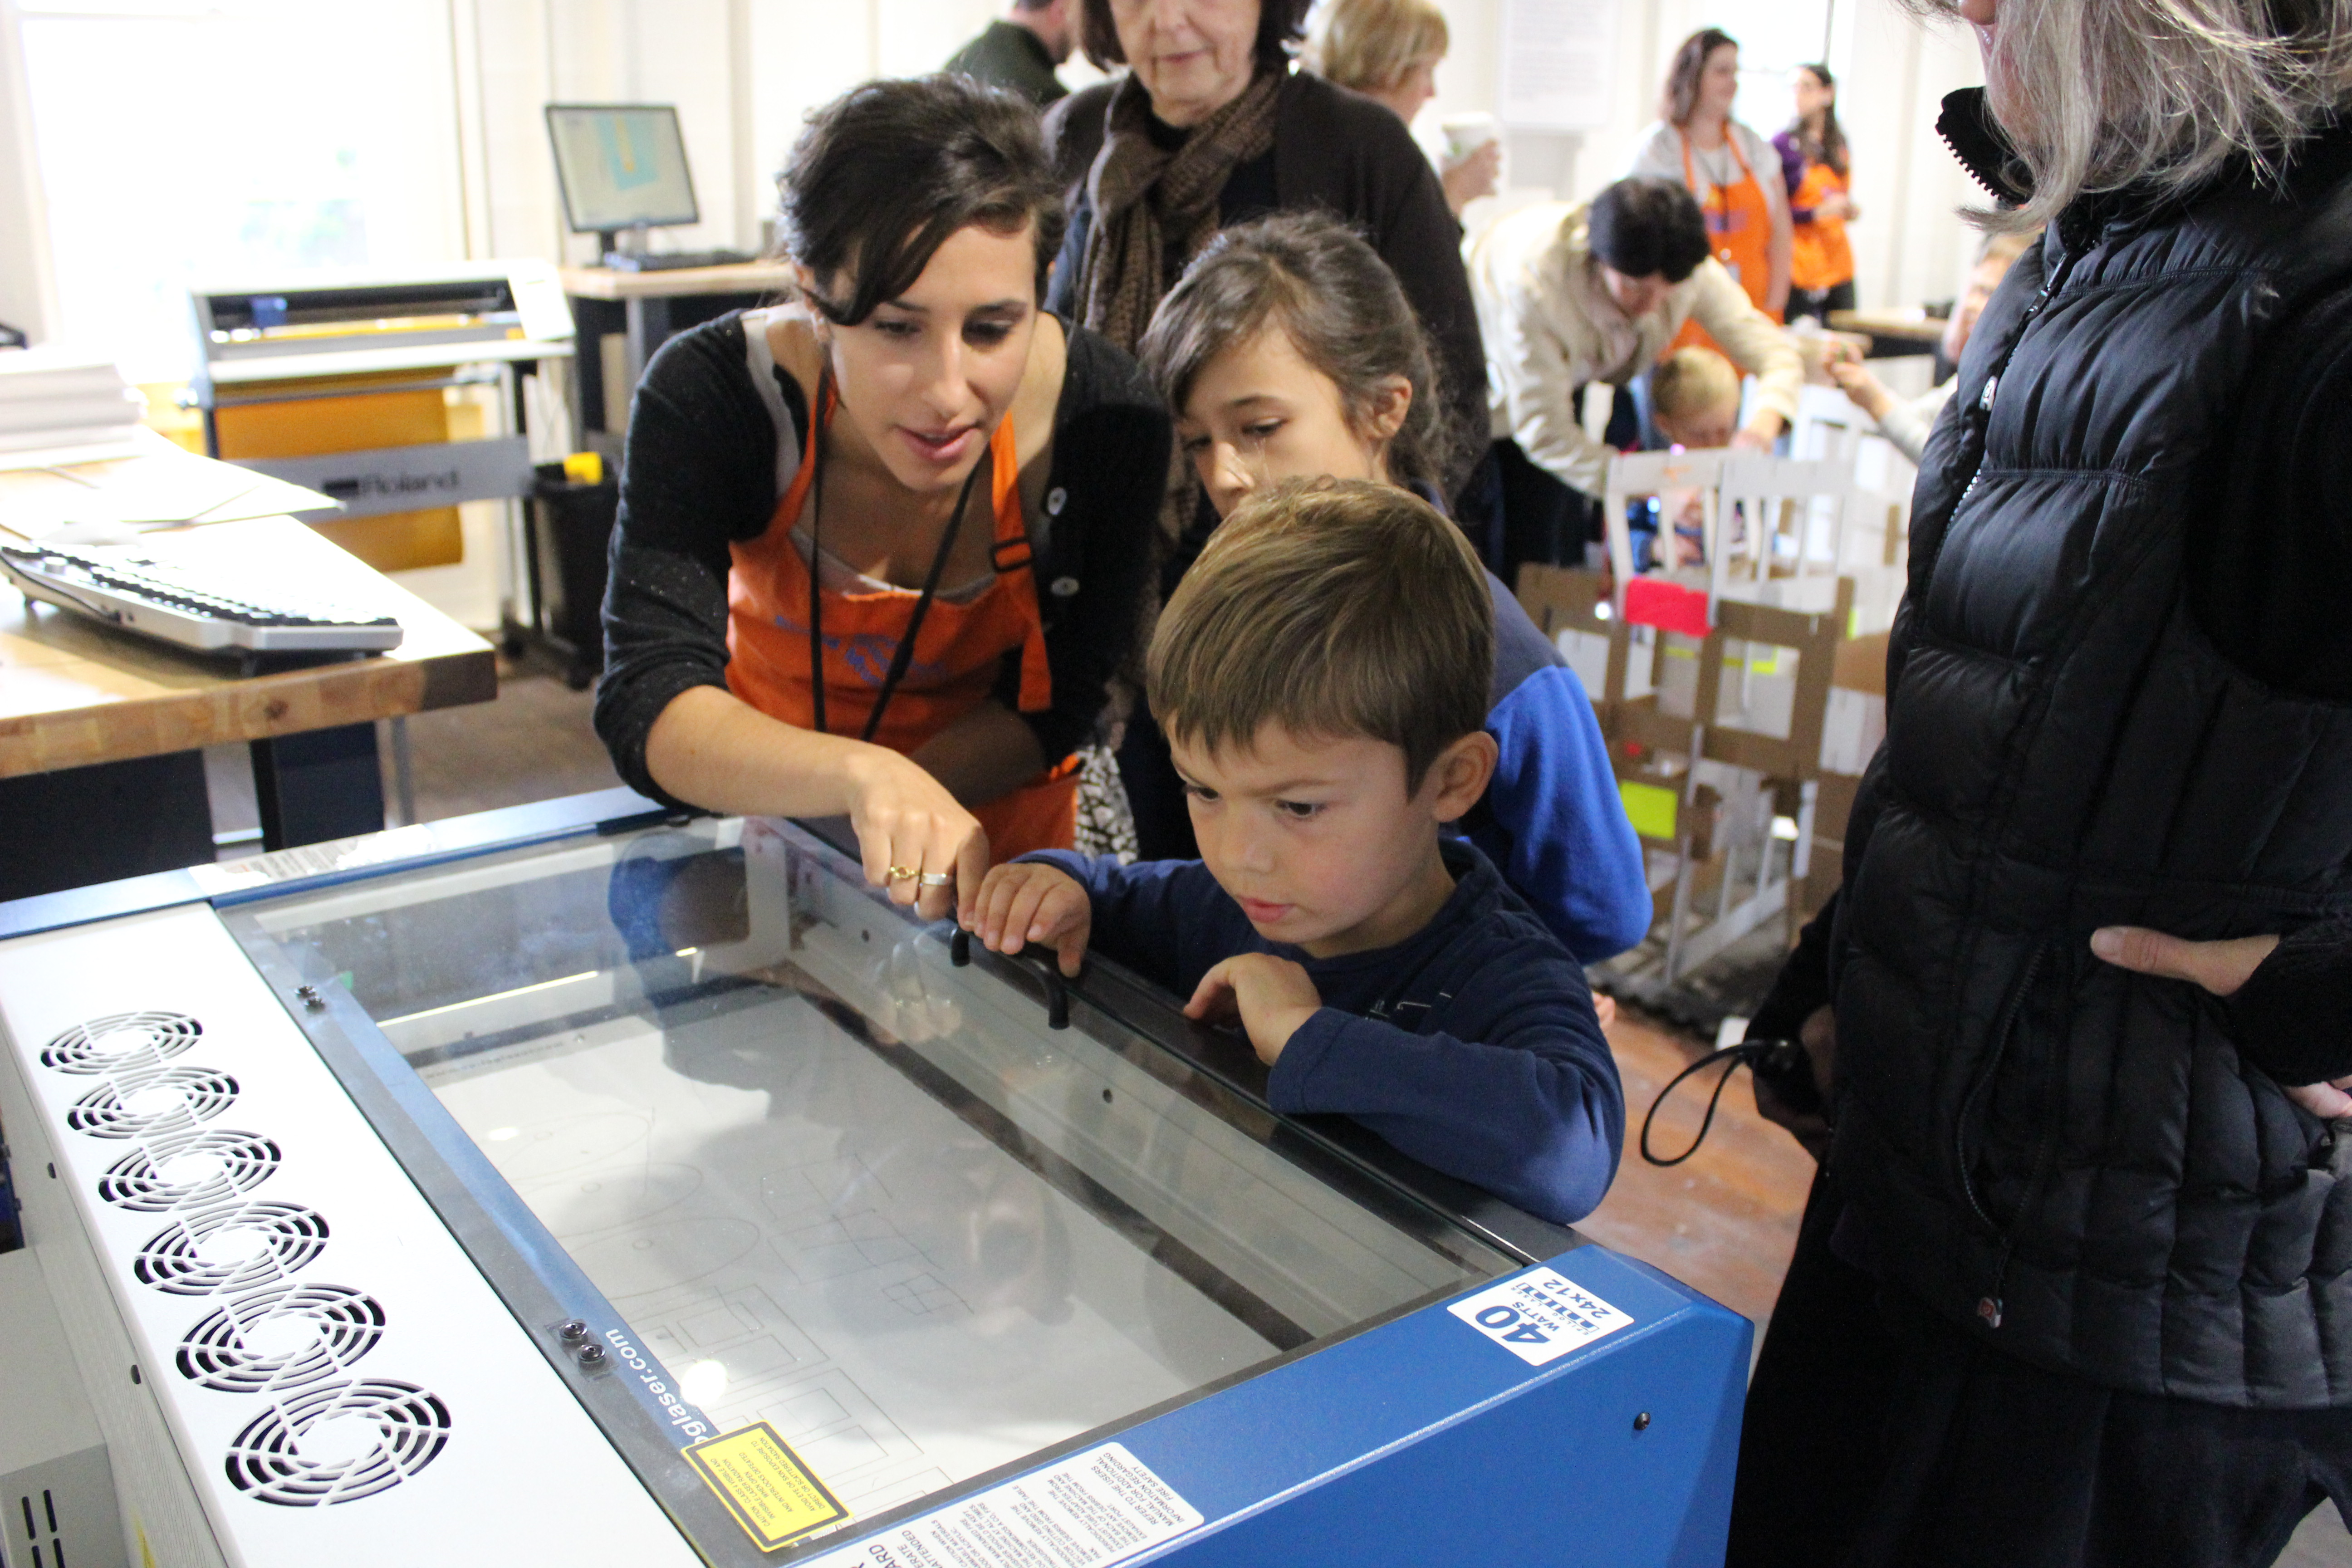 A Fabrication Lab for Early Childhood Education: Technology as a Hands-on Art